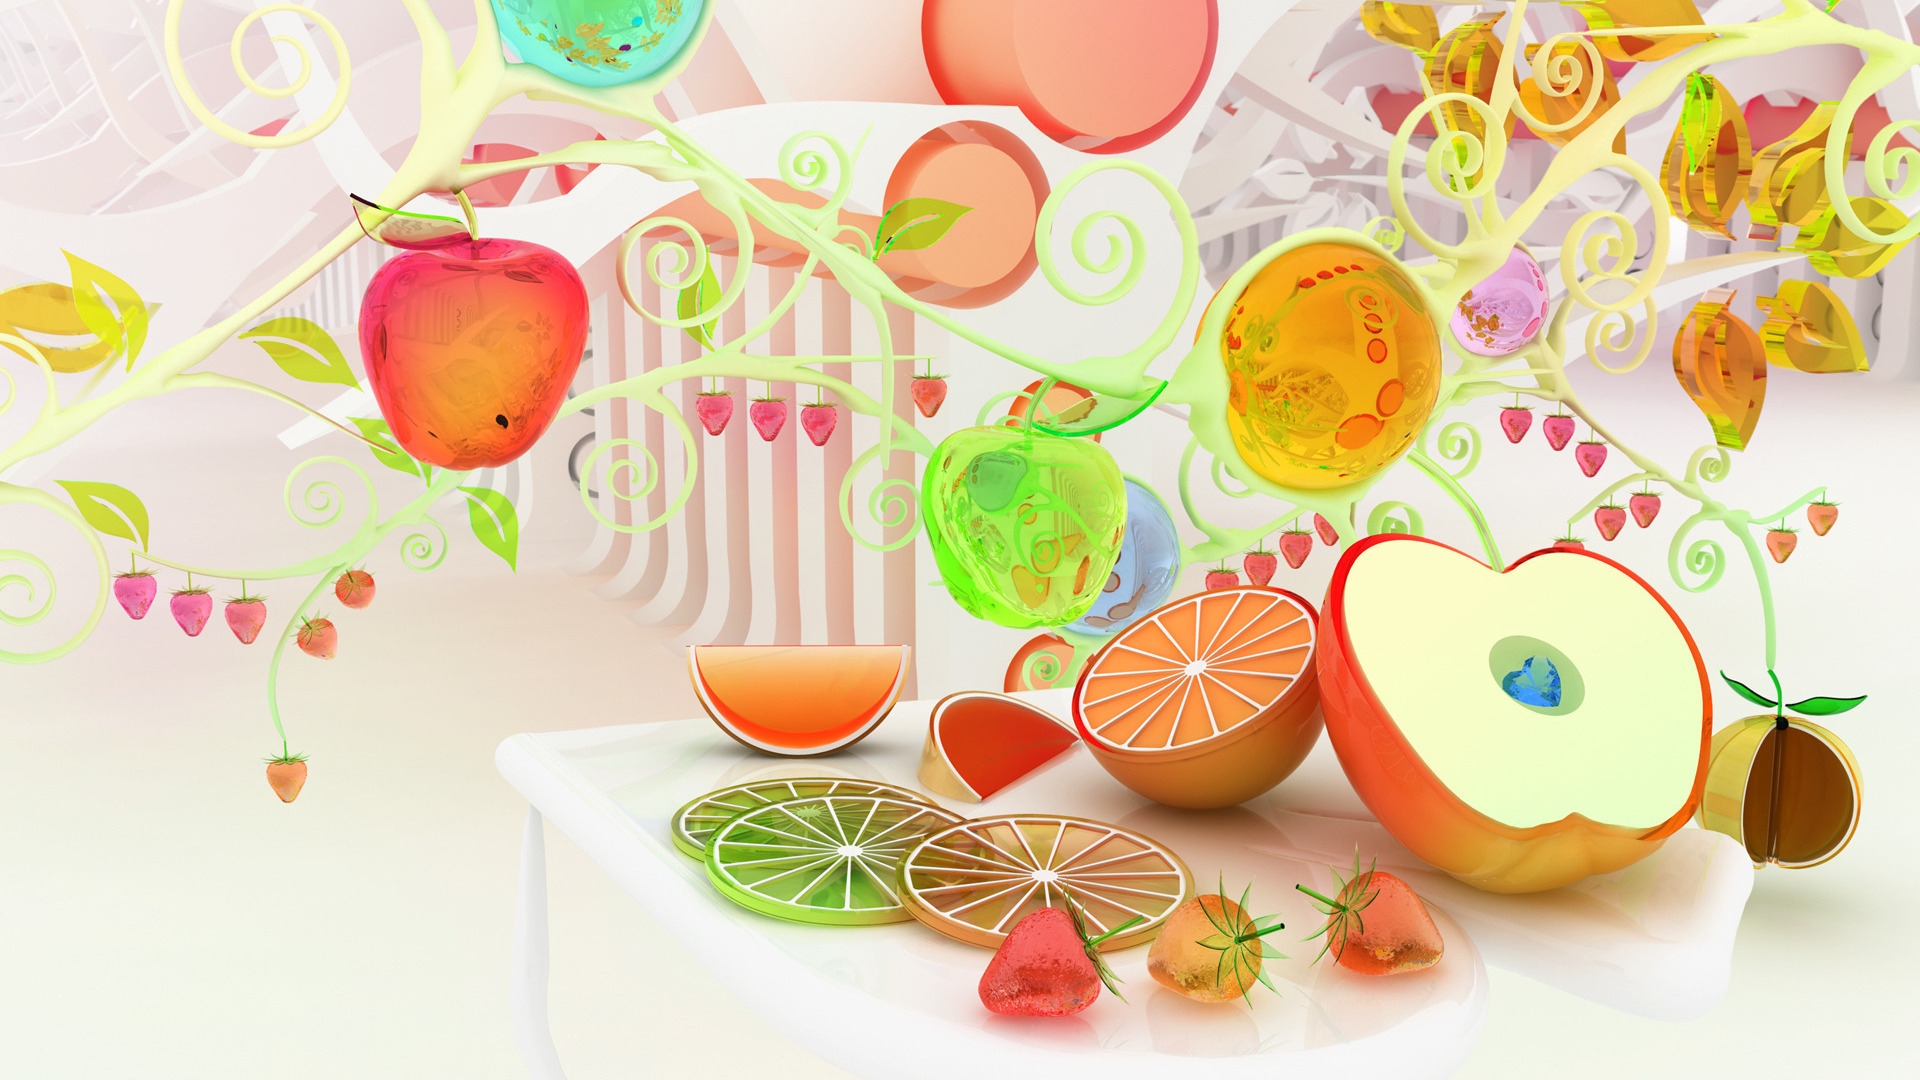 Fruits for 1920 x 1080 HDTV 1080p resolution